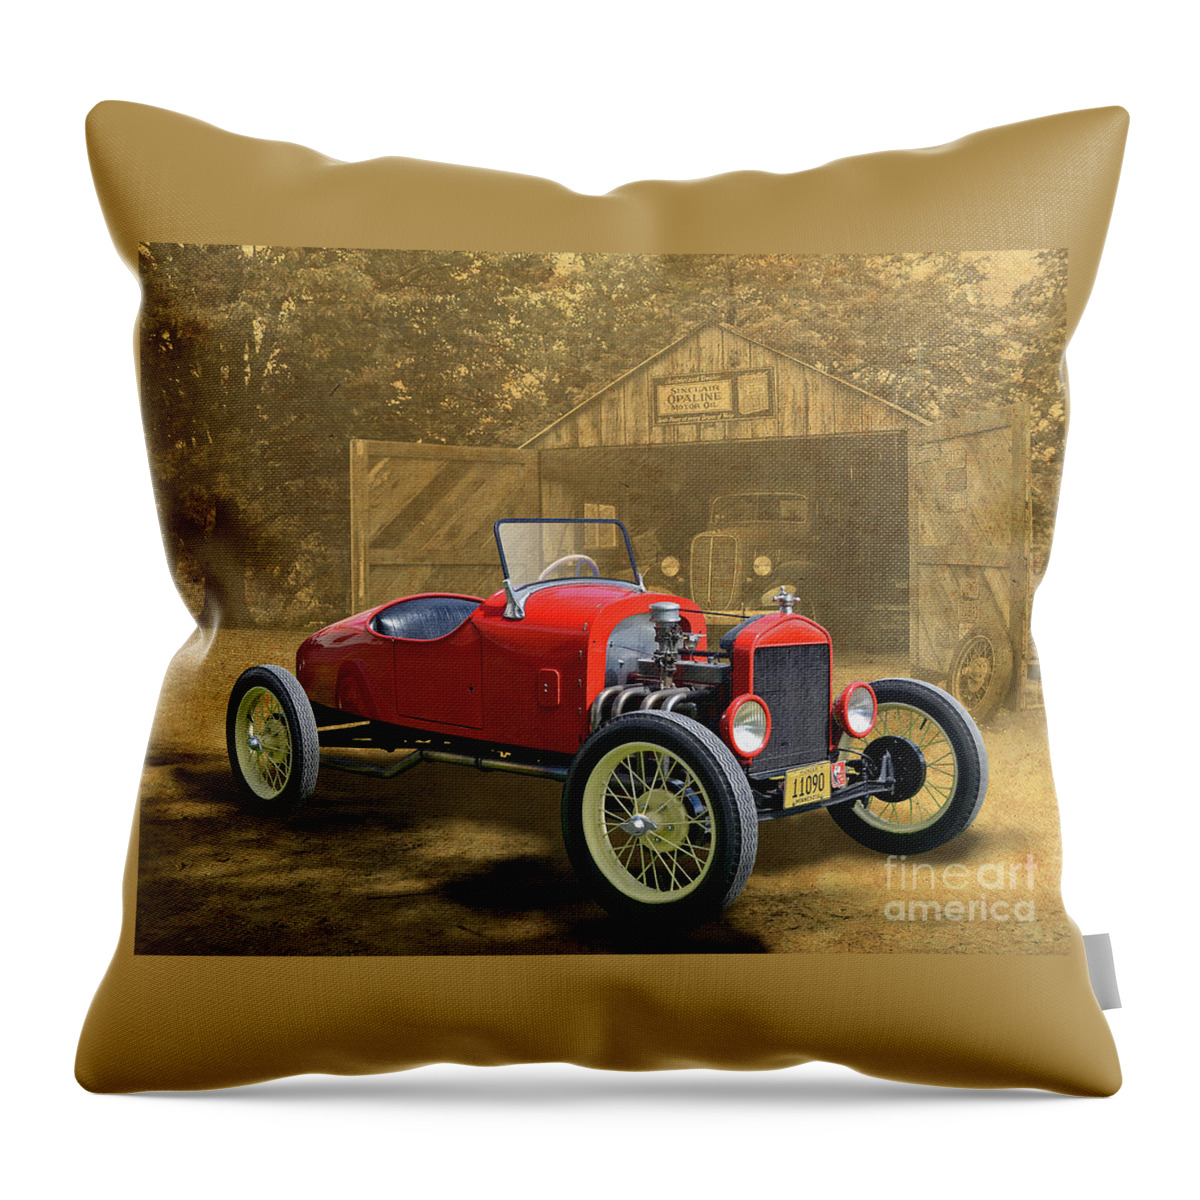 1926 Throw Pillow featuring the photograph 1926 Ford Hot Rod by Ron Long